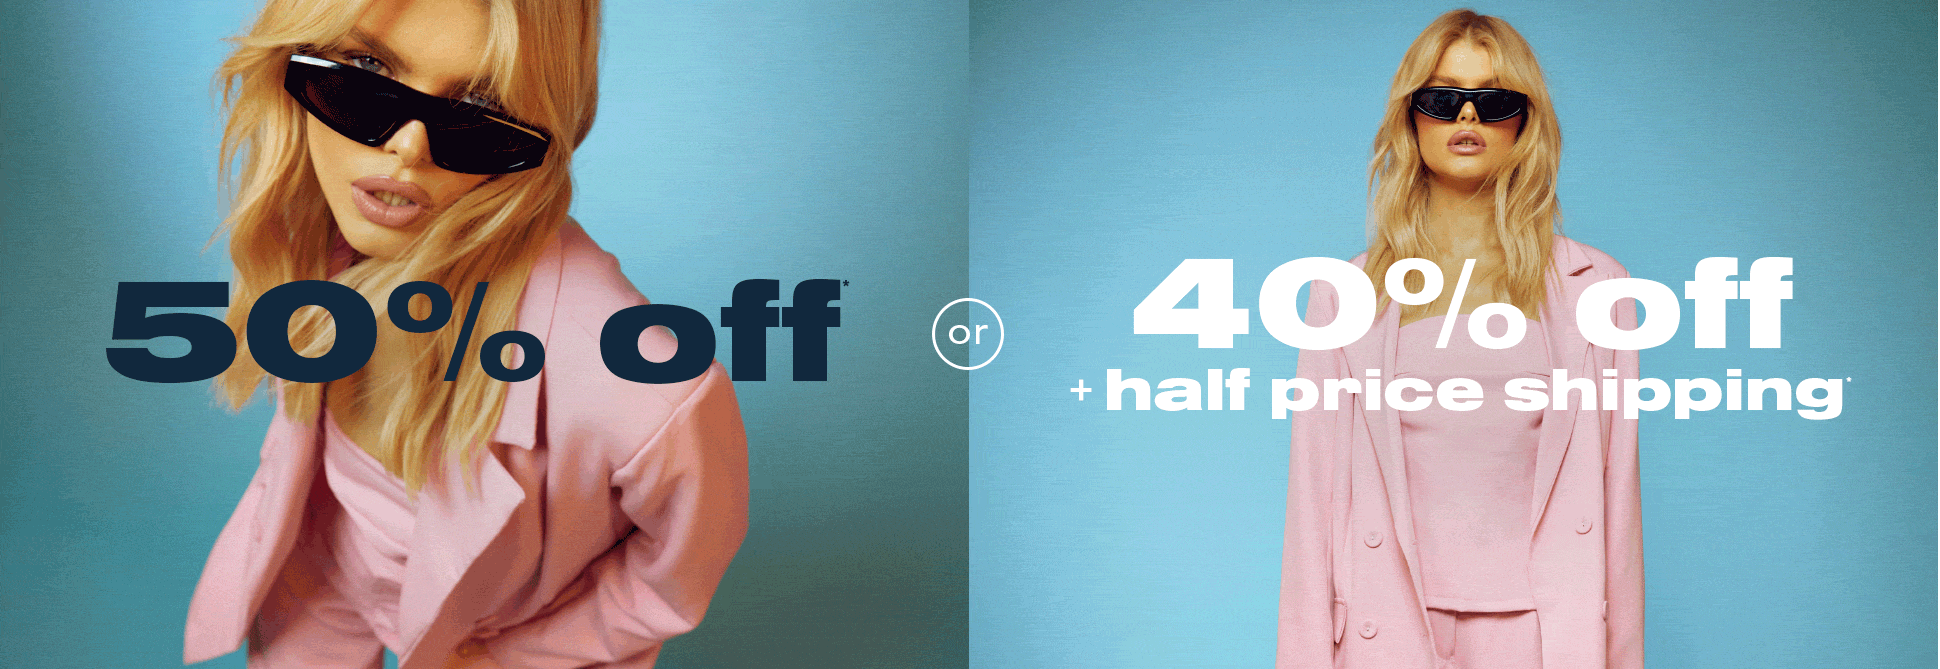 \50% off everything!* or 40% off & half prince shipping!**